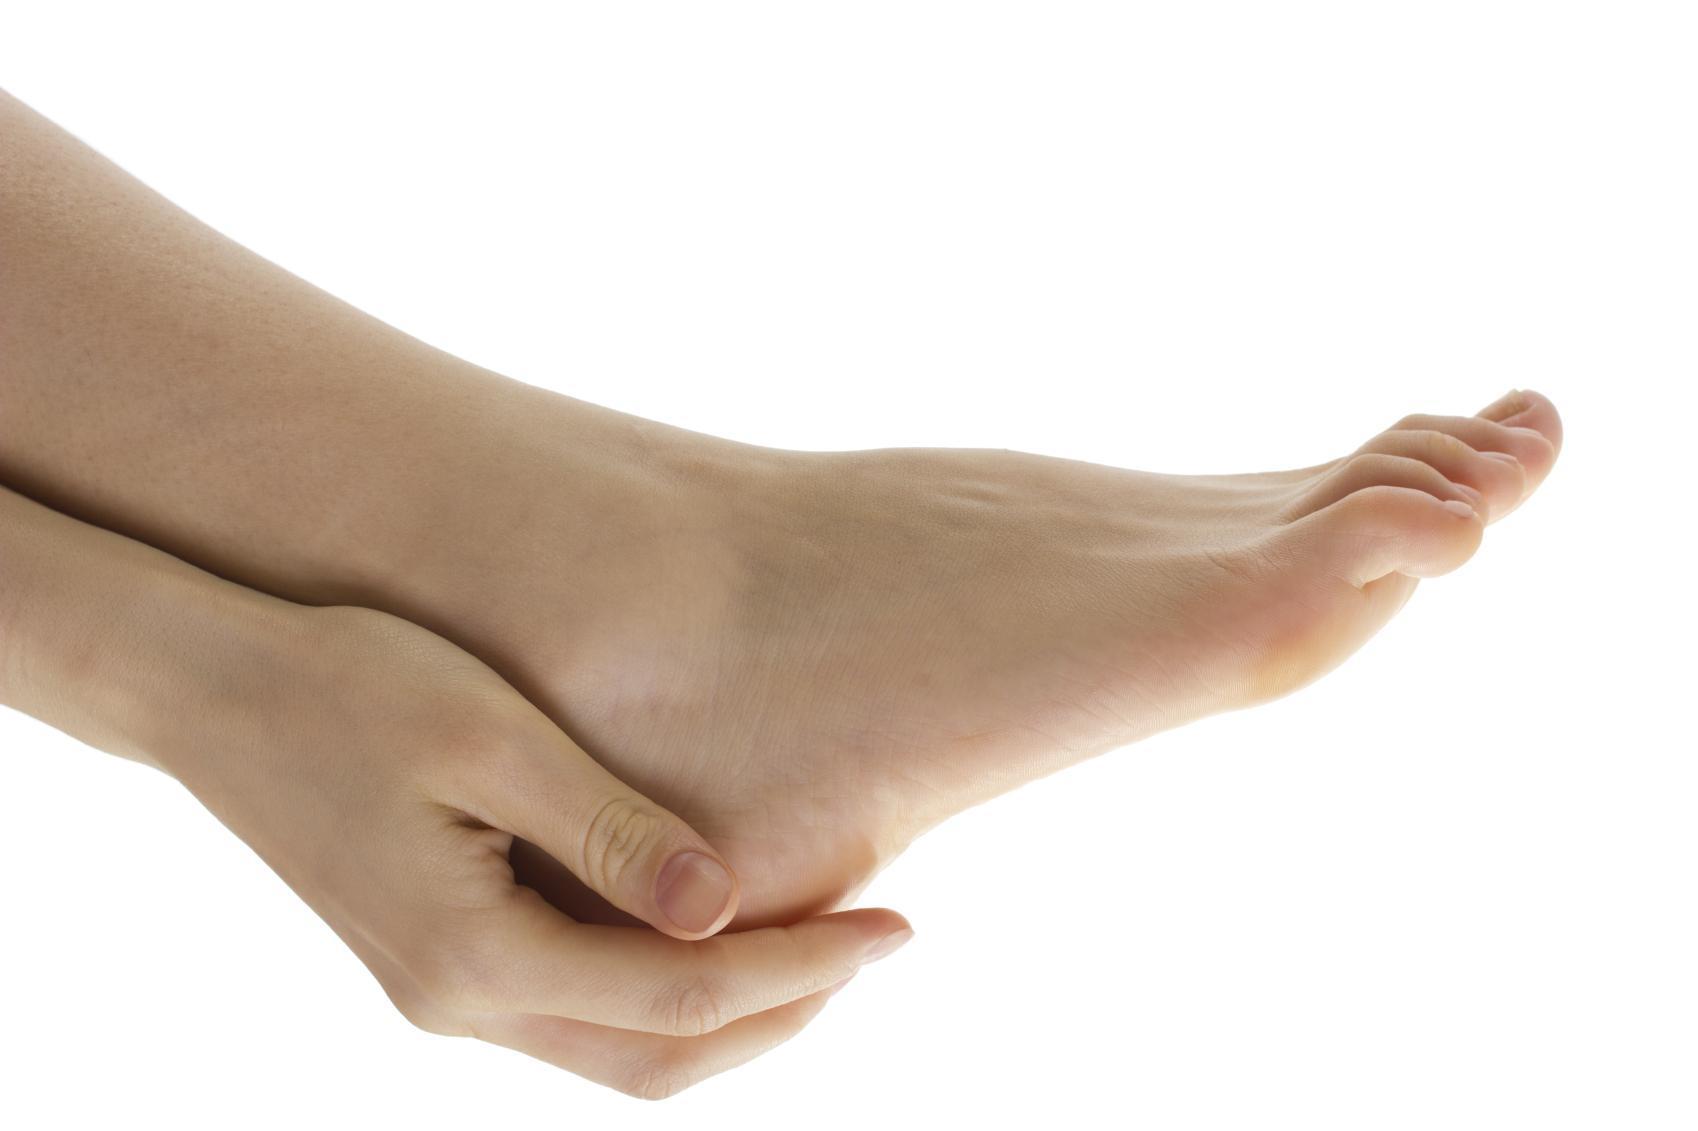 10 Simple Home Remedies For Cracked Heels